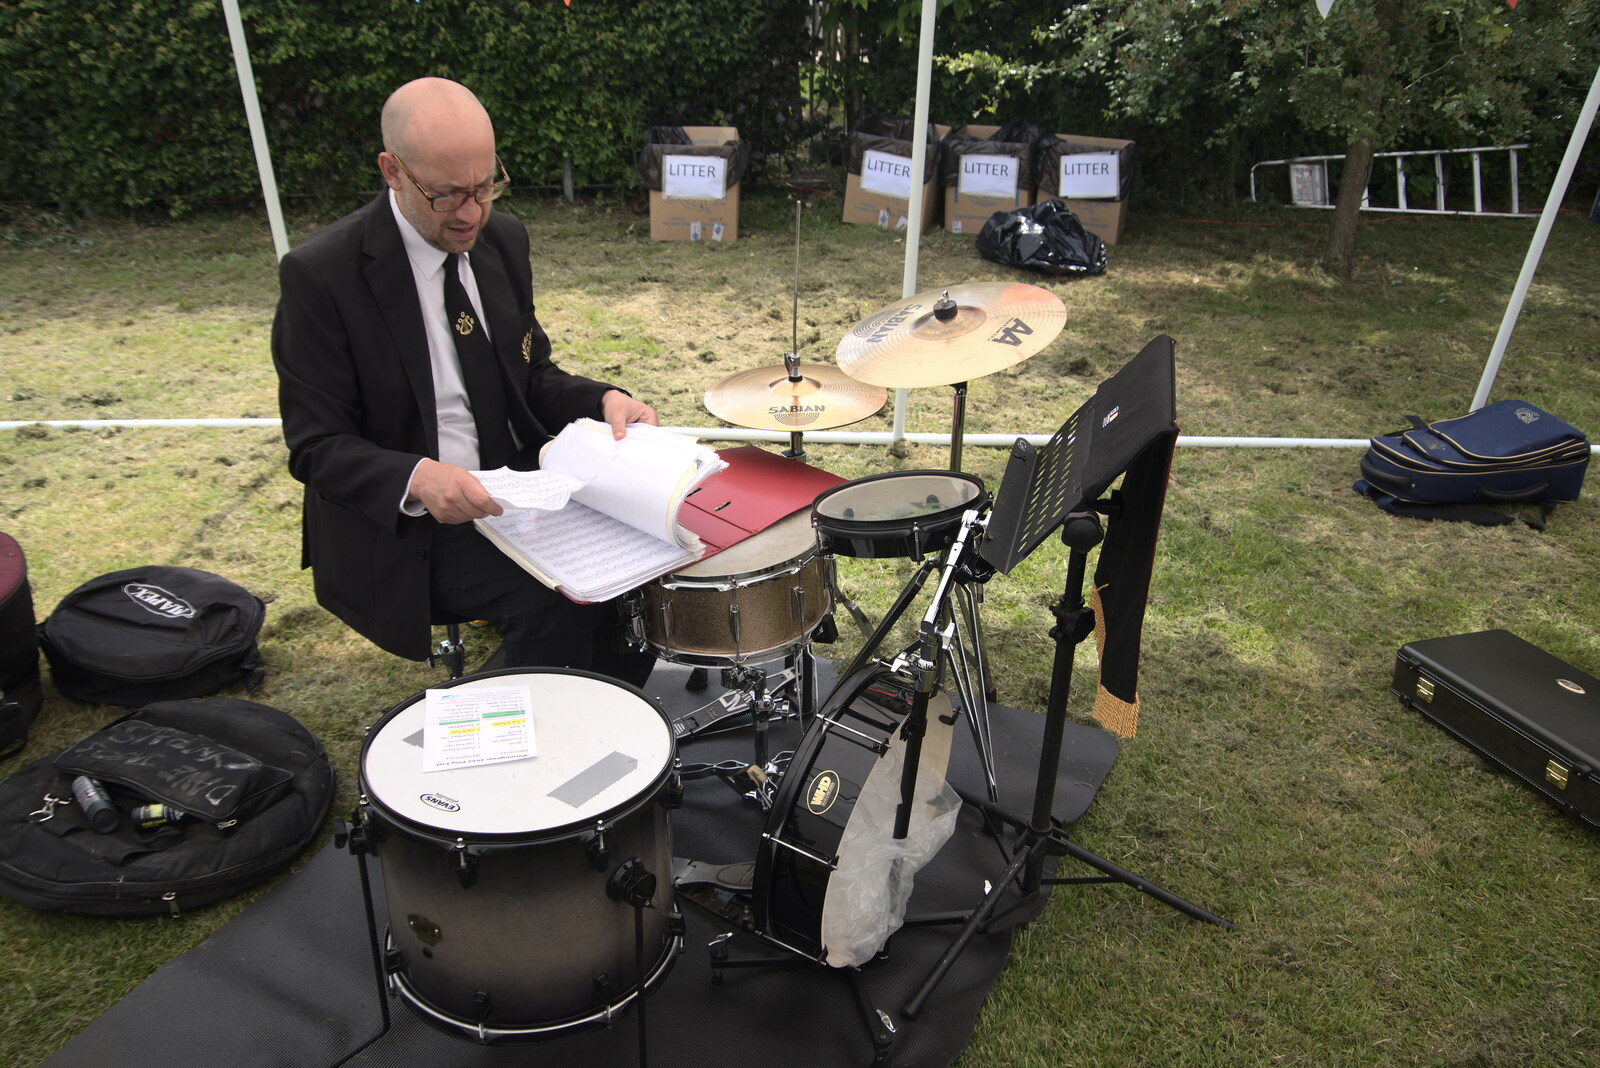 James is trialling his new travel drumkit from The Gislingham Silver Band at Barningham, Suffolk - 3rd June 2022